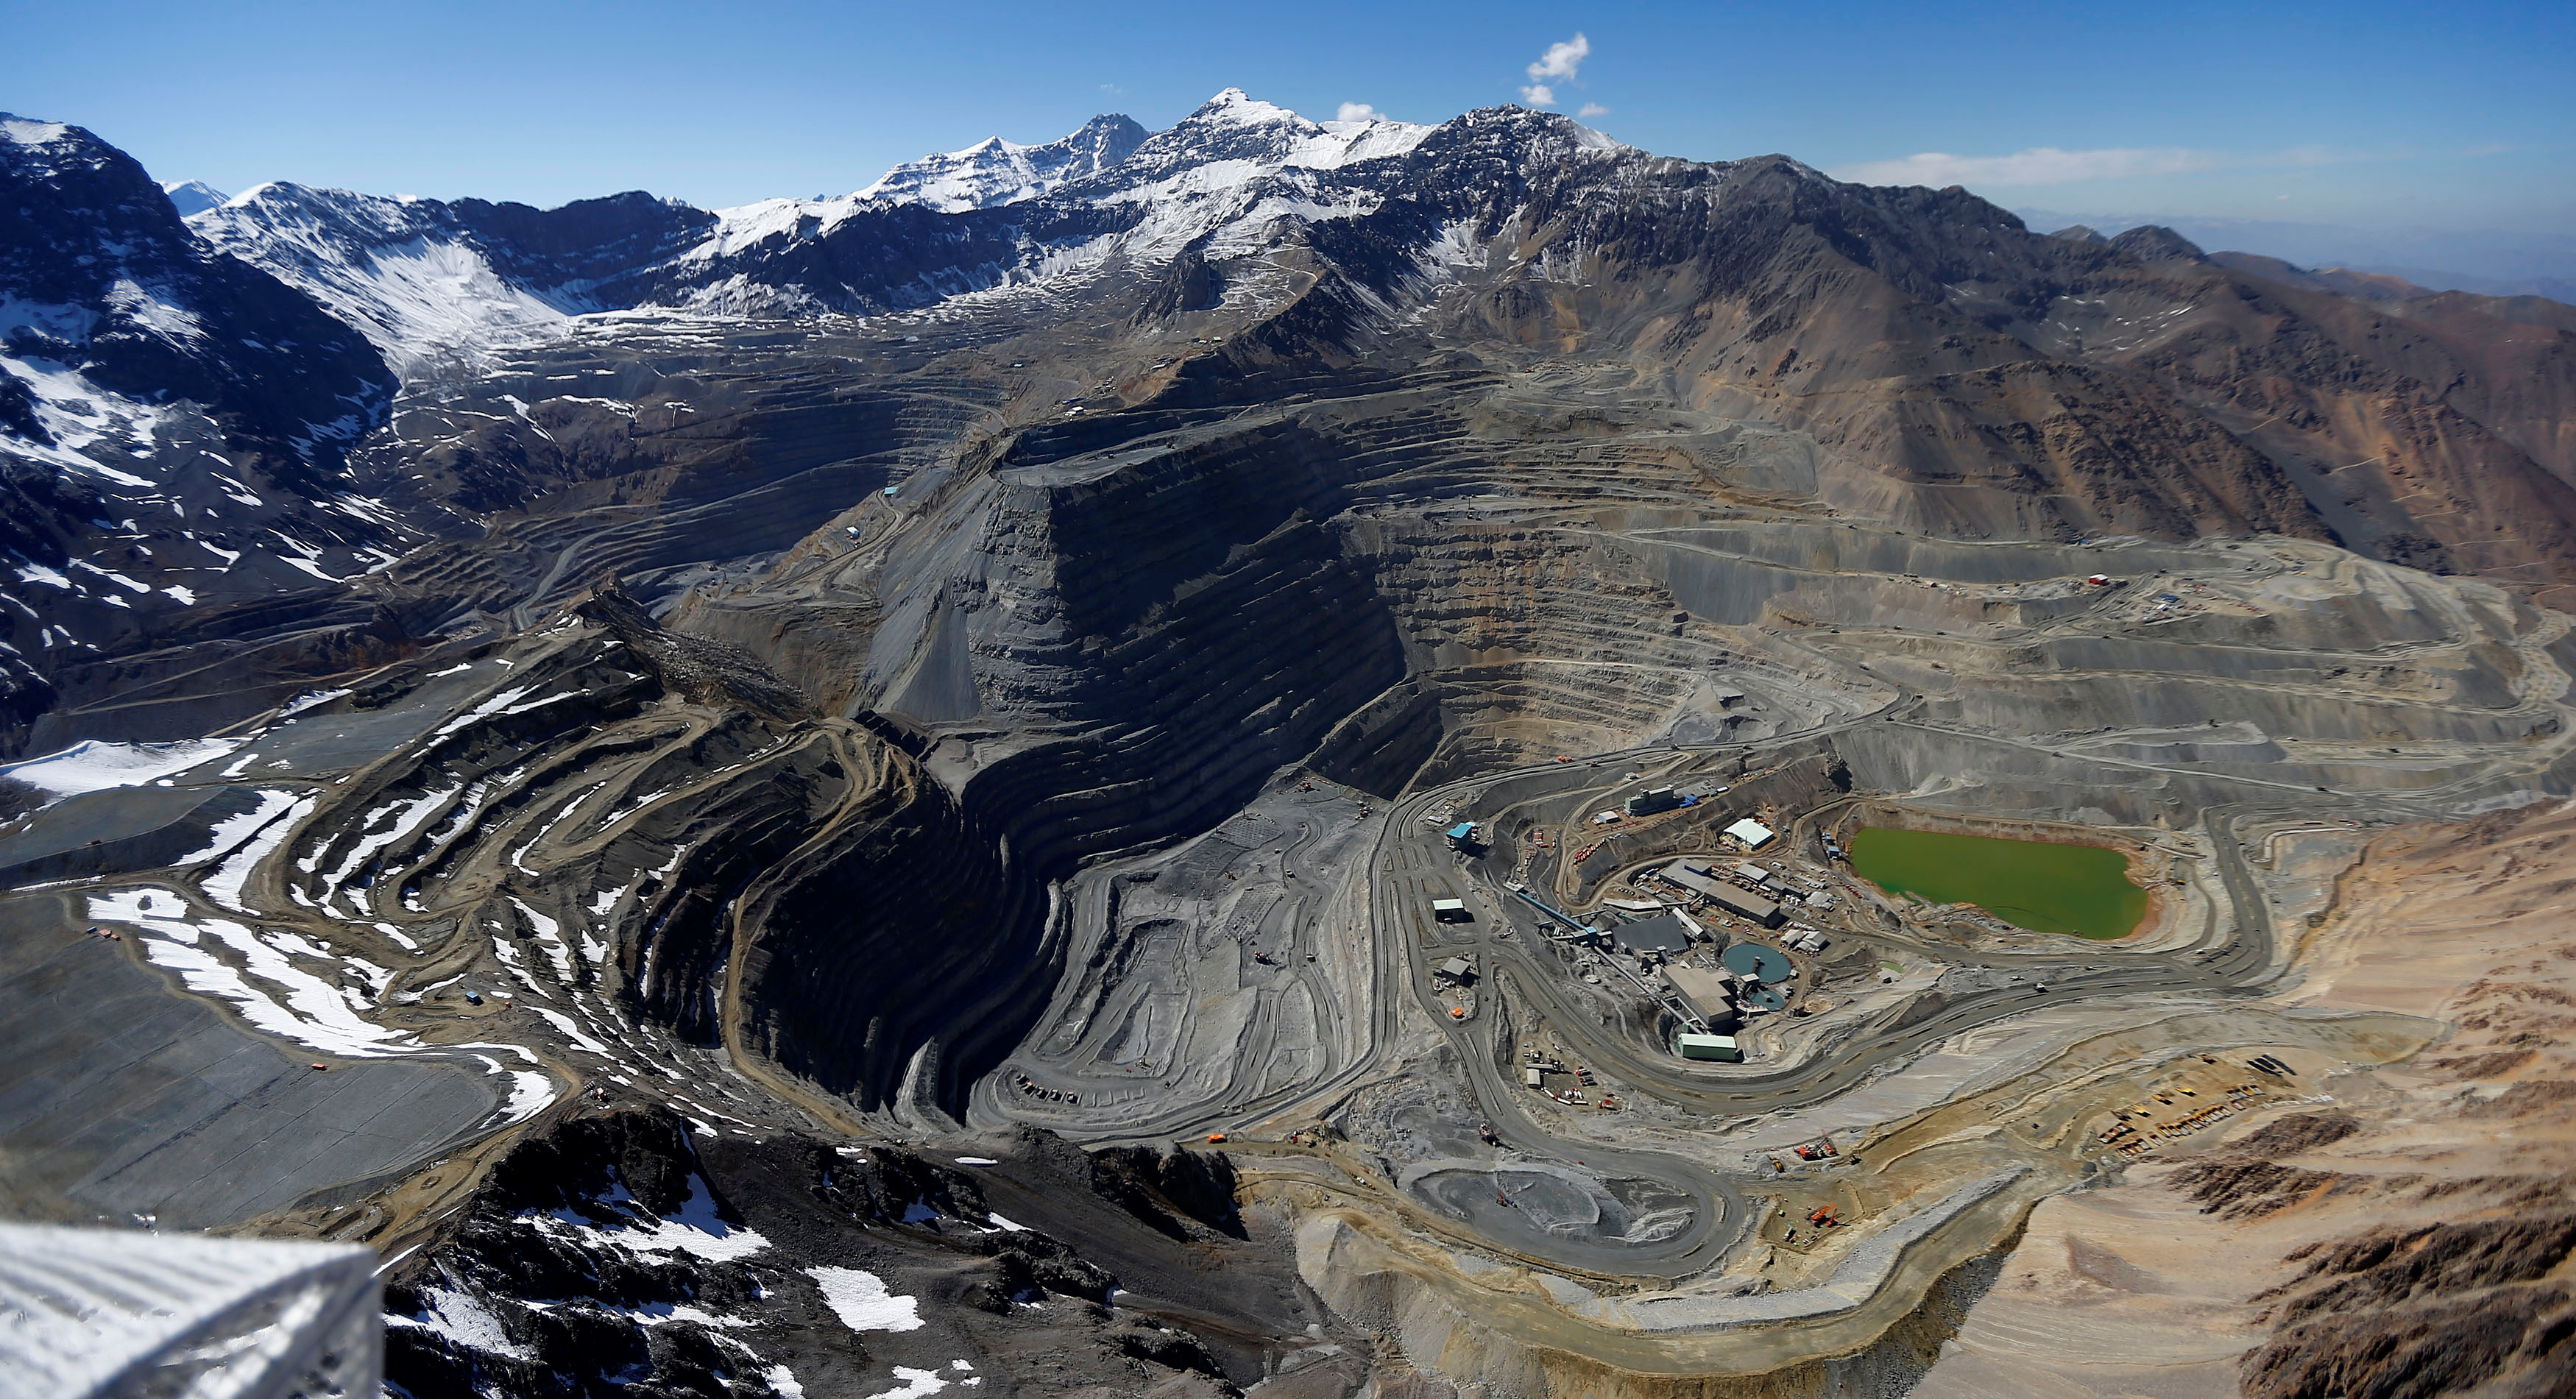 An aerial view of open pits of CODELCO's Andina and Anglo American's Los Bronces copper mines with Olivares glaciers in the background at Los Andes Mountain range